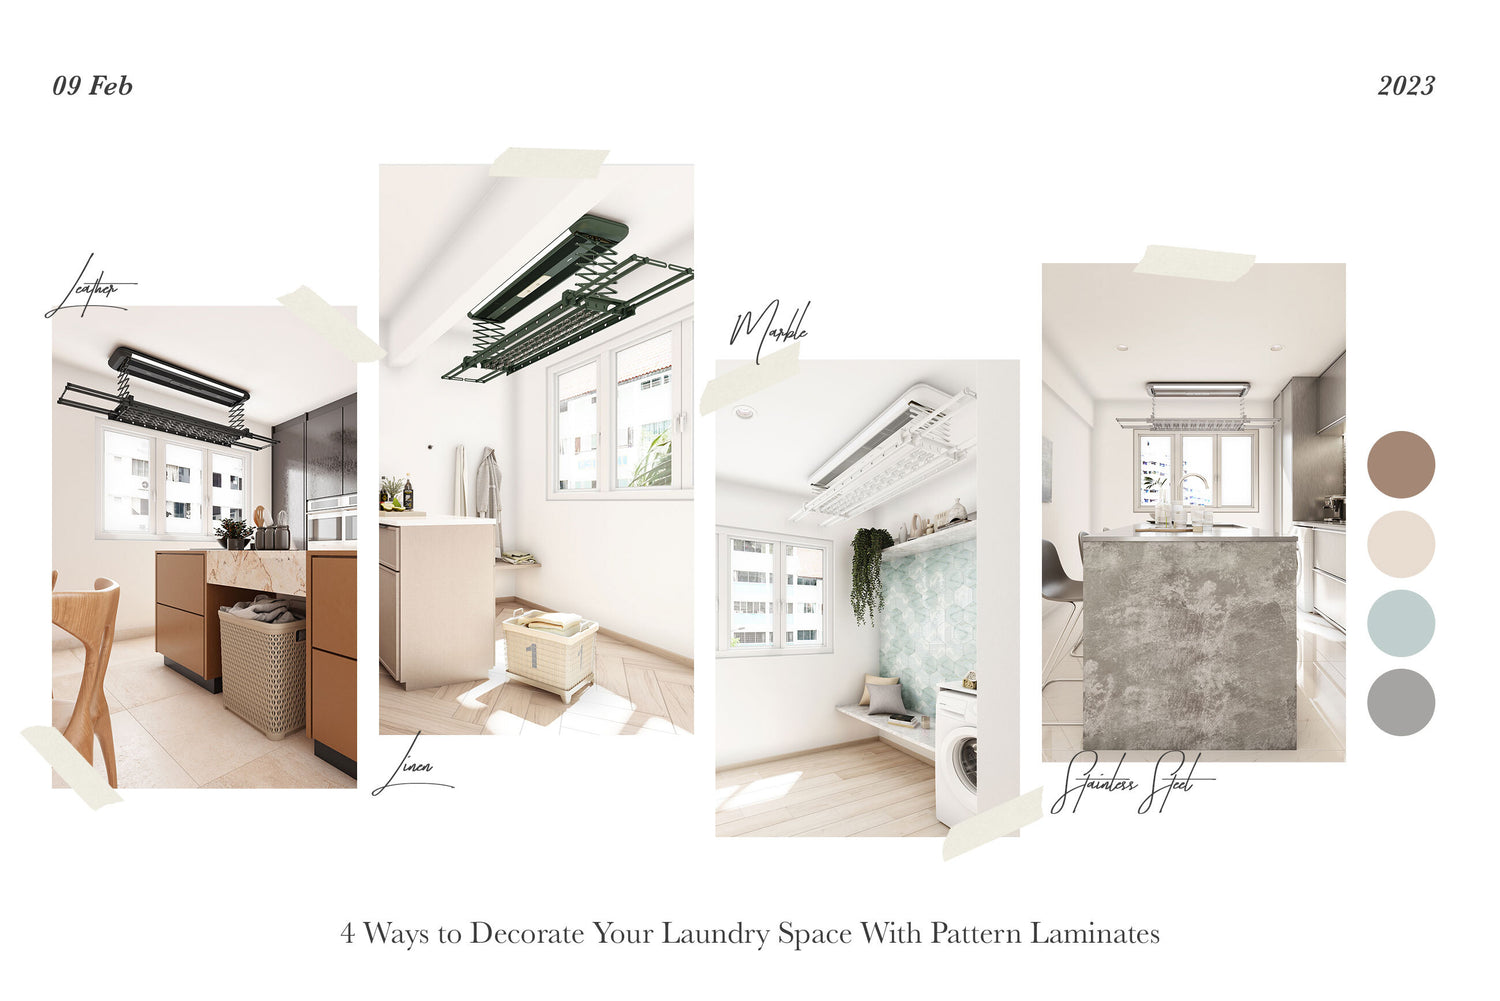 4 Ways to Decorate Your Laundry Space With Pattern Laminates 